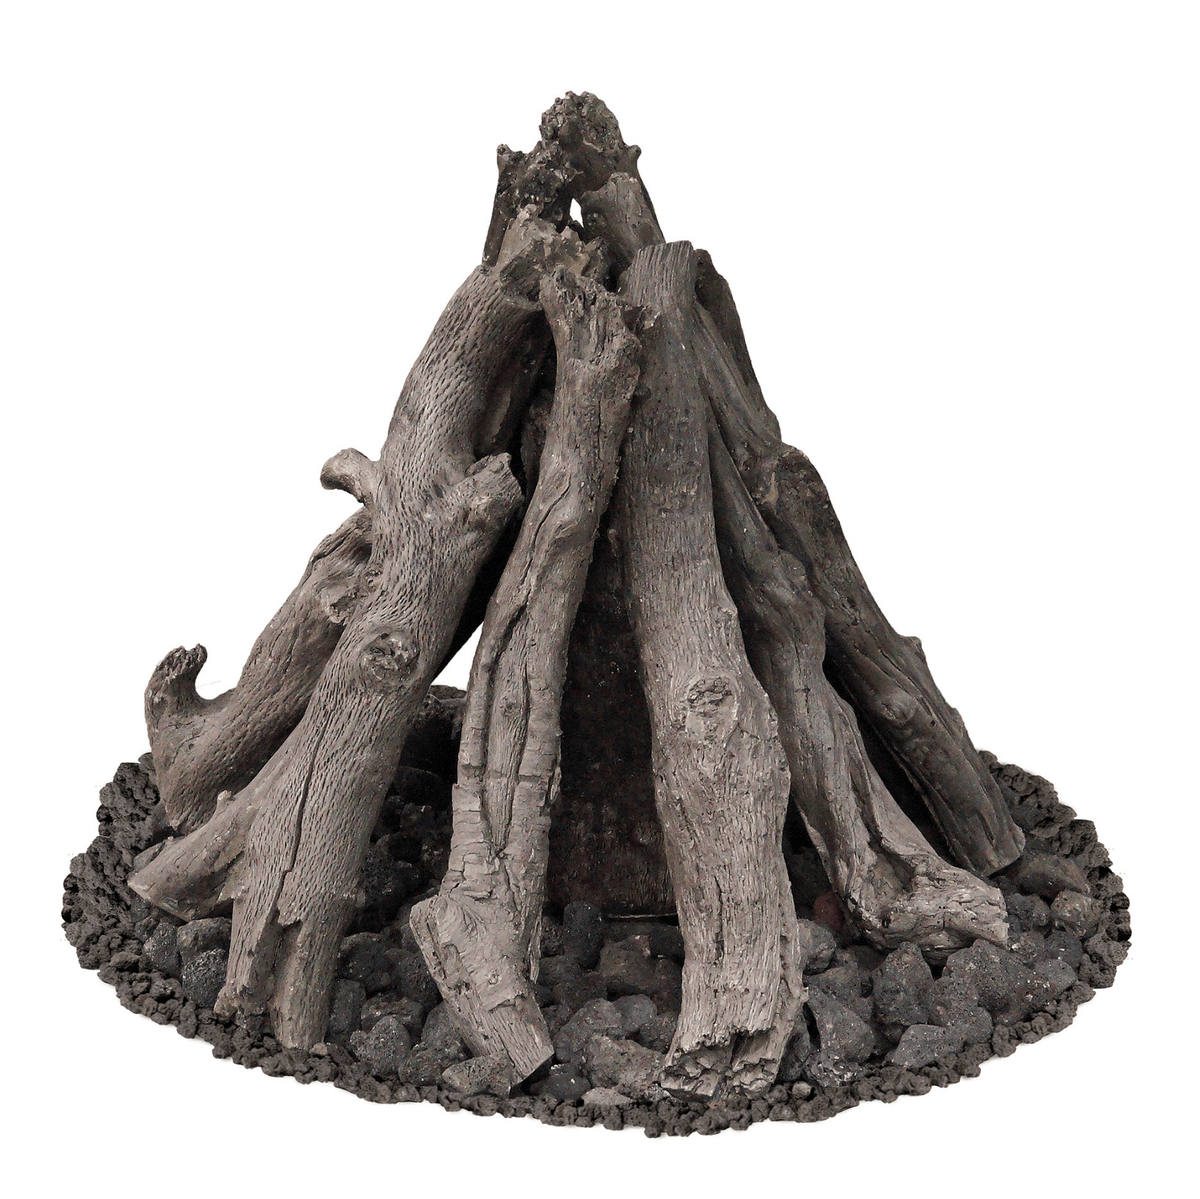 American Fyre Designs Fire Features American Fyre Designs Logs for Fire Pits and Tables / Back Country Oak, Desert Sage, Prairie Oak, Campfyre Logs, or Beachwood Logs / BCO-27, DS-27, PRO-27, OCL-34, and OCBW-34